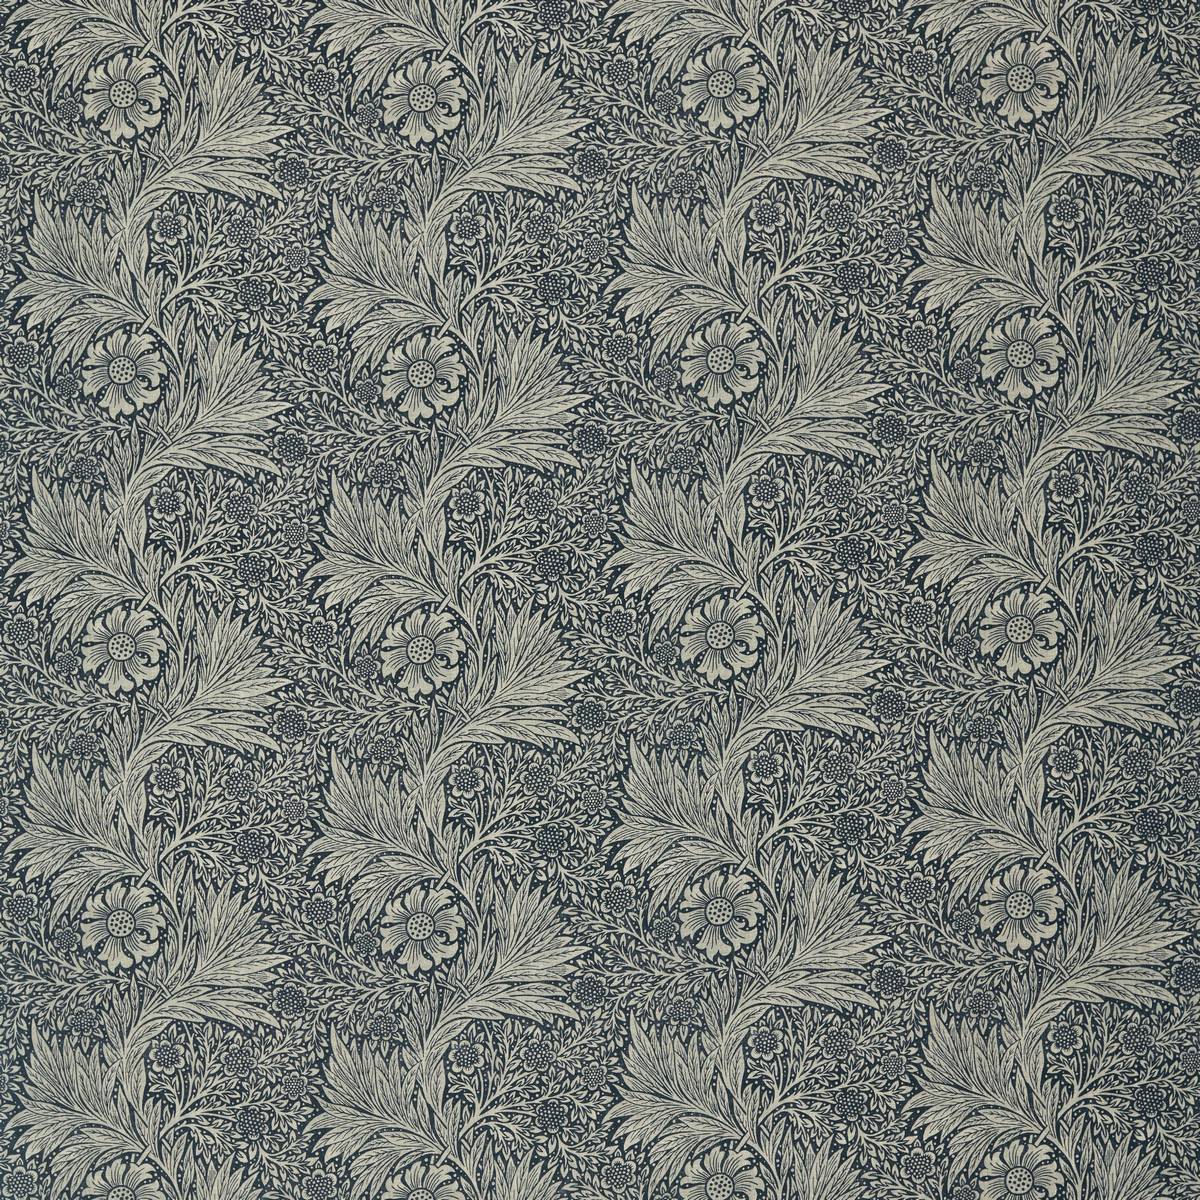 Pure Marigold Print Black Ink Fabric by William Morris & Co.